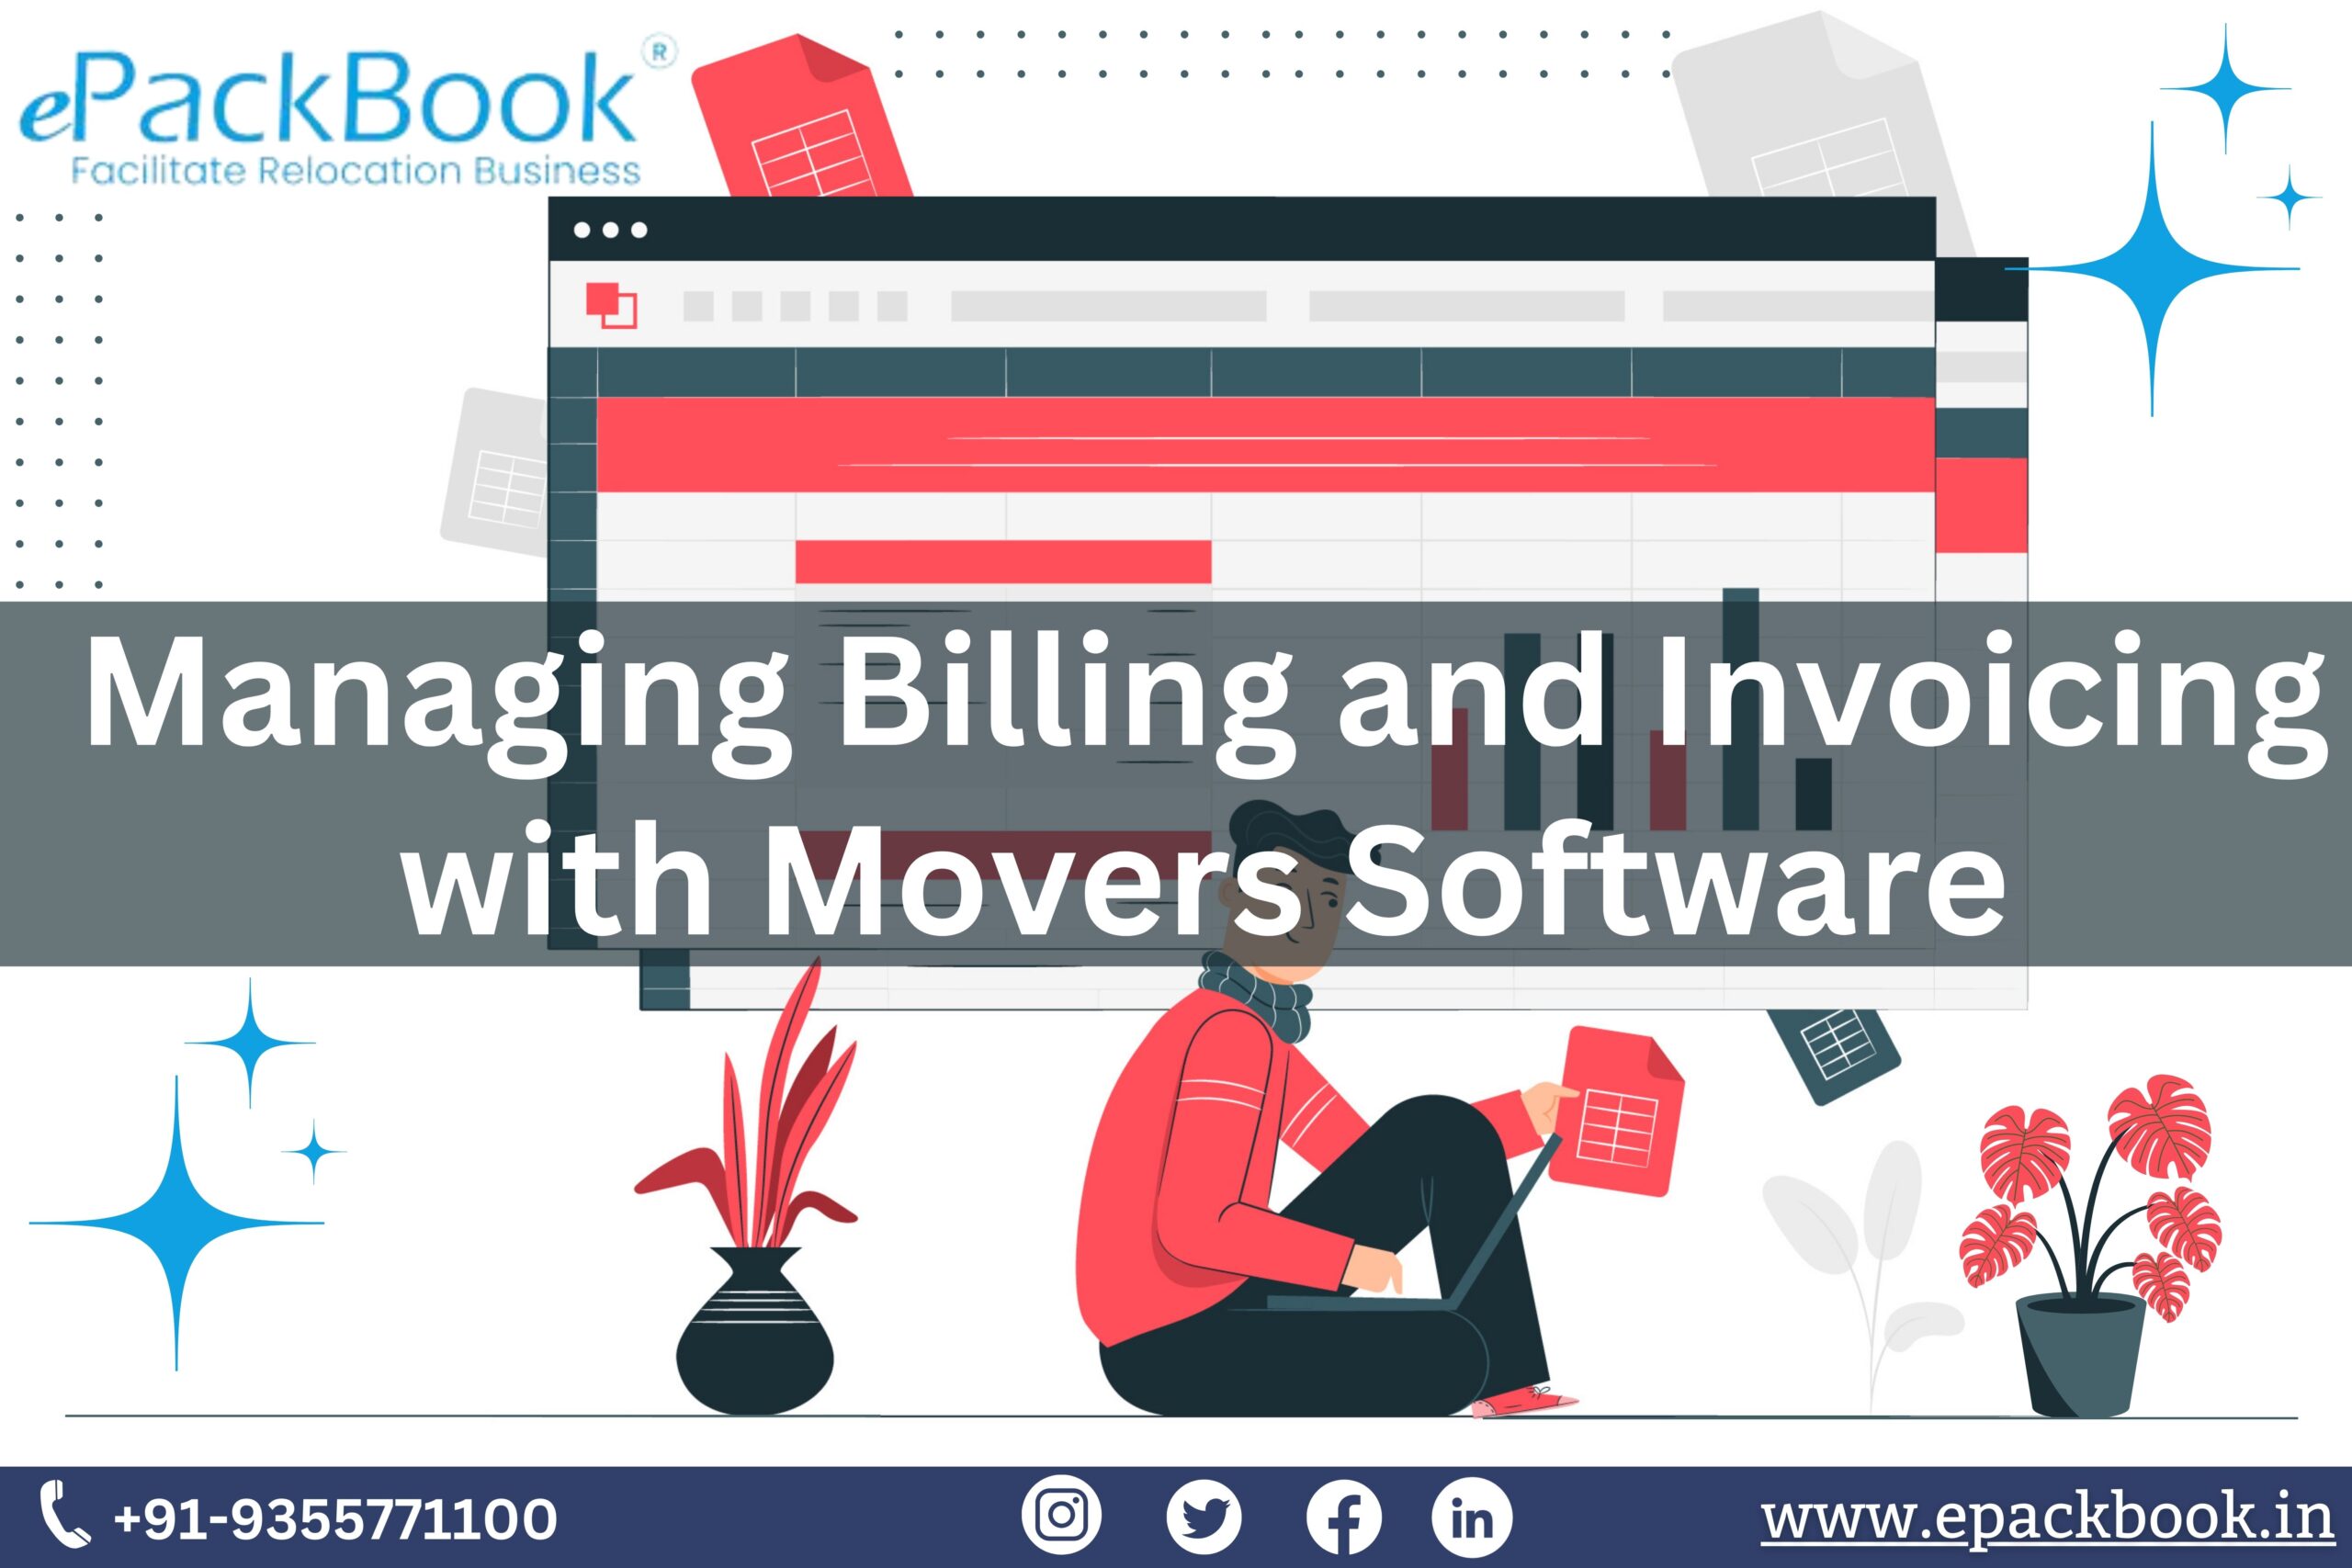 Managing Billing and Invoicing with Movers Software